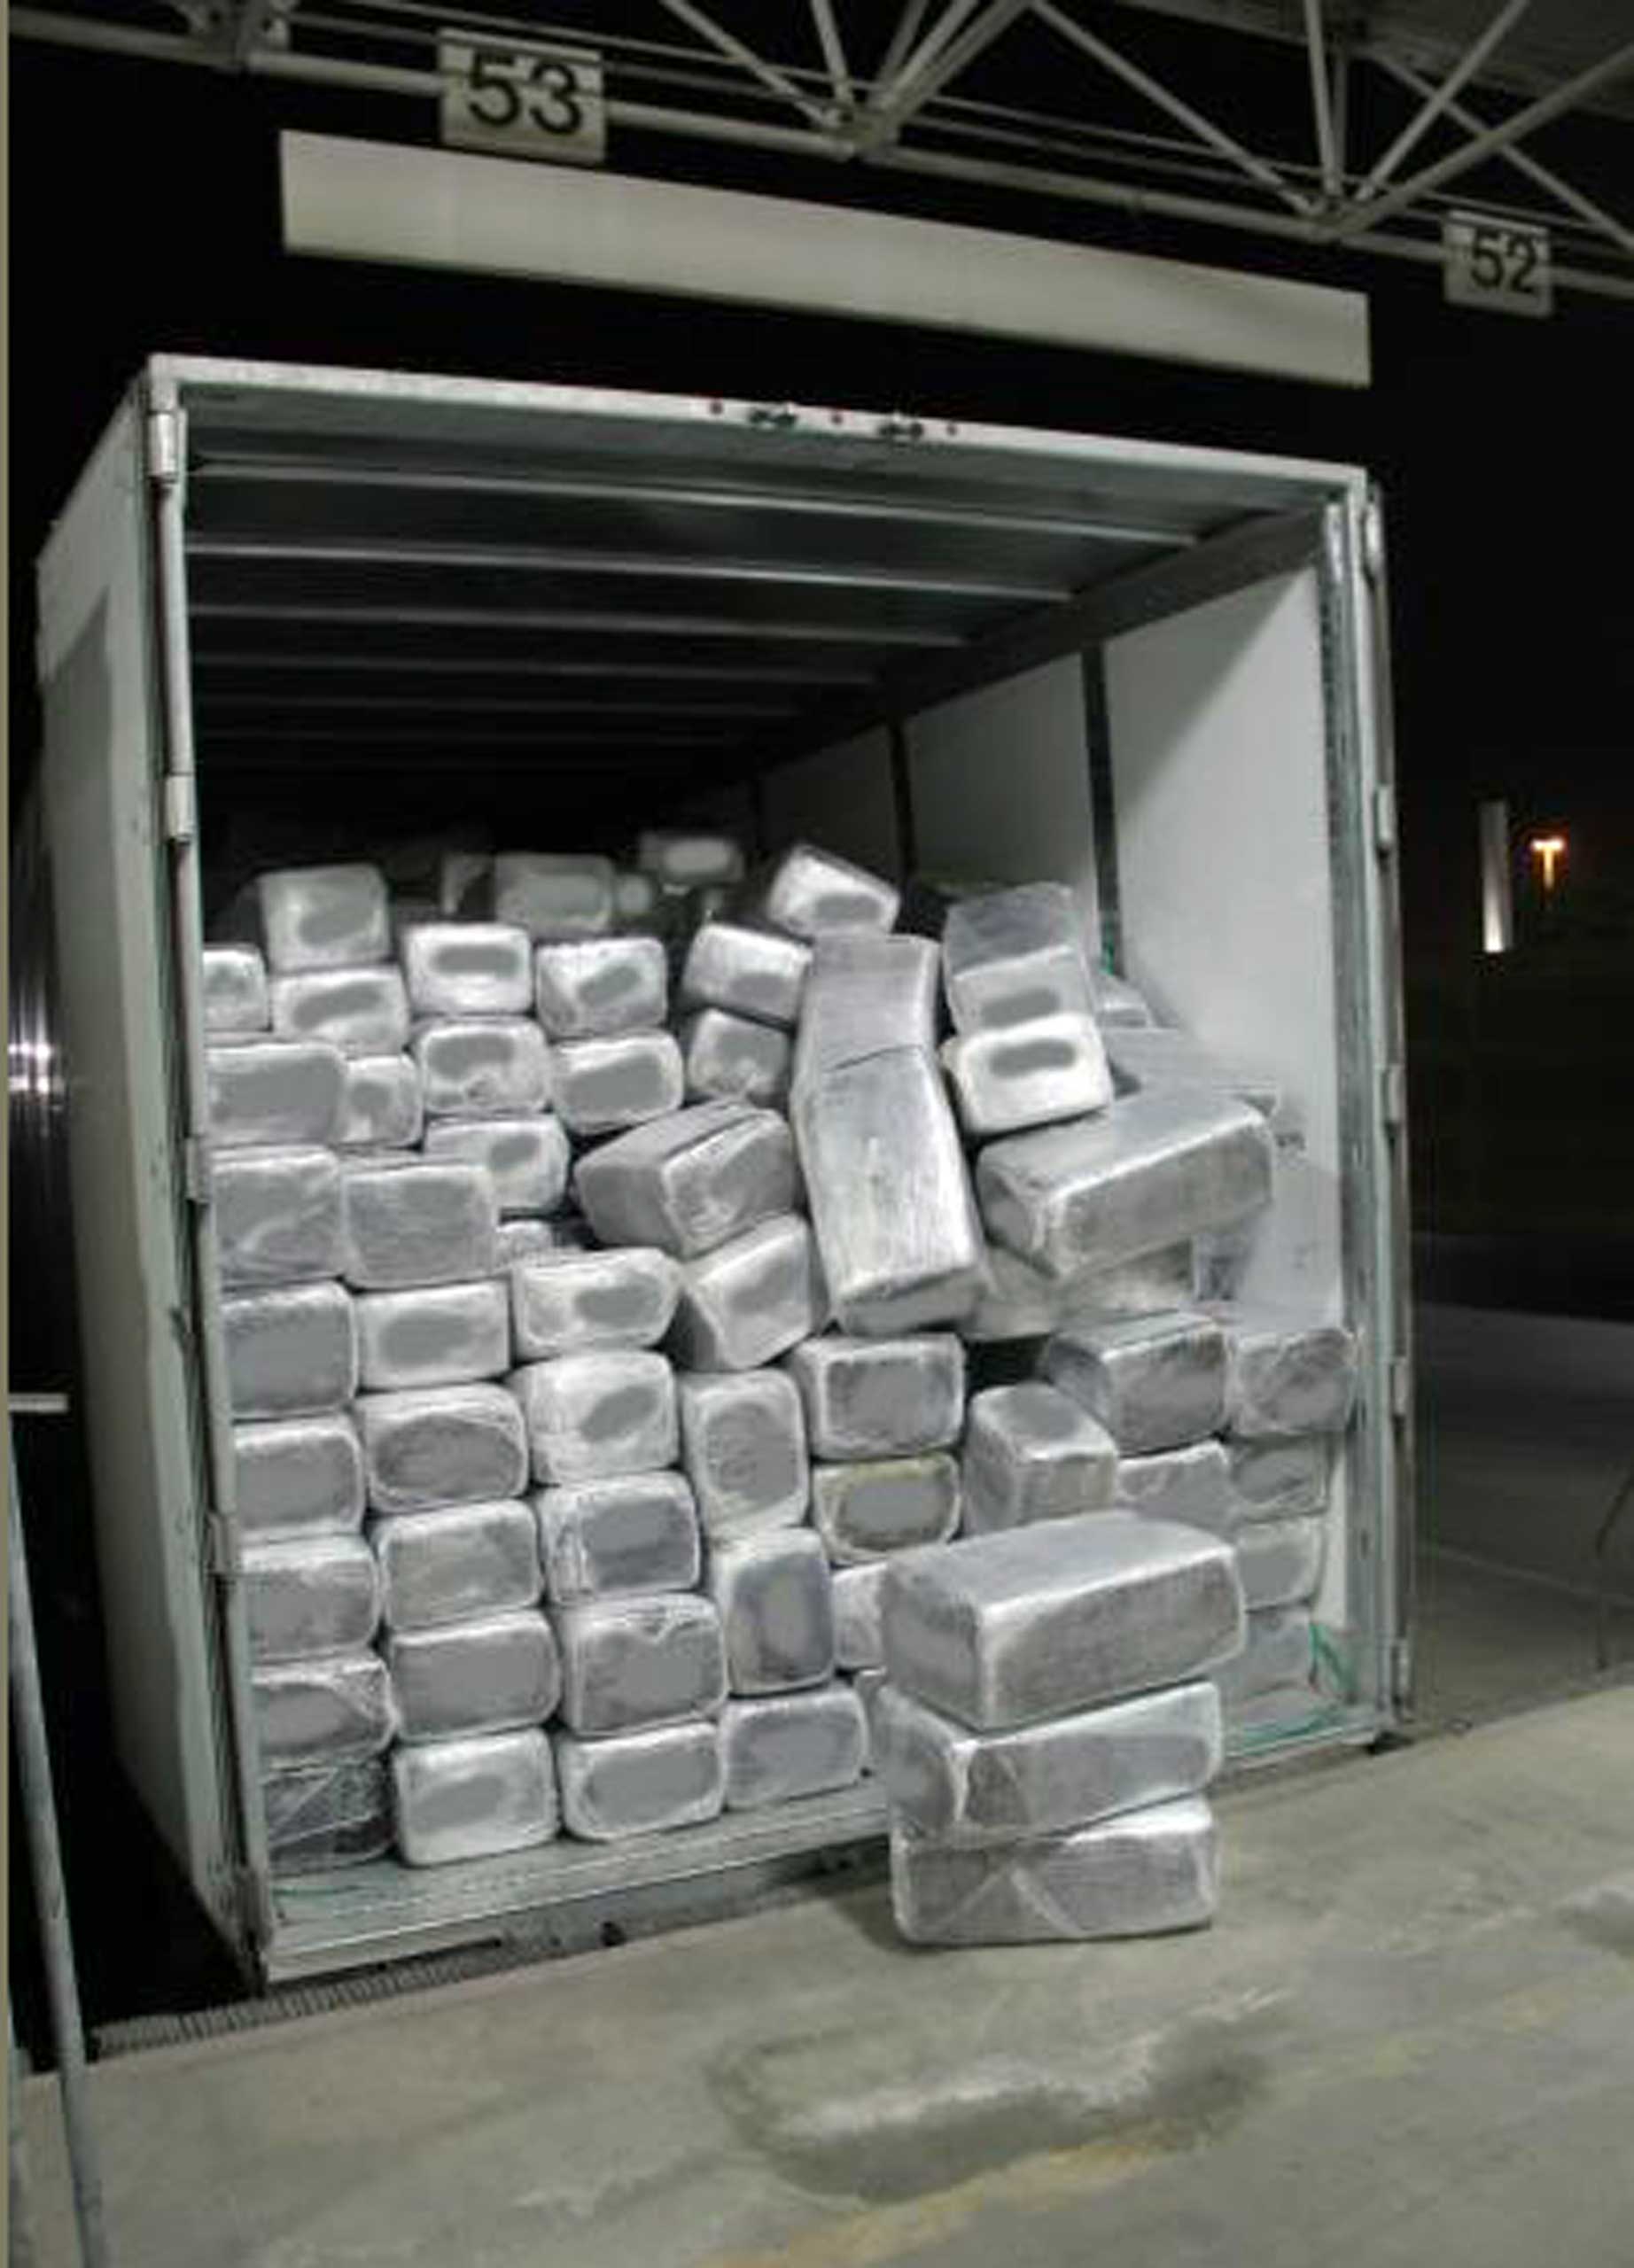 More than 15 tons of marijuana hidden in a truck was seized by the Border Patrol at the Otay Mesa border crossing with Mexico in San Diego, Calif., Feb. 26, 2015. (AP)